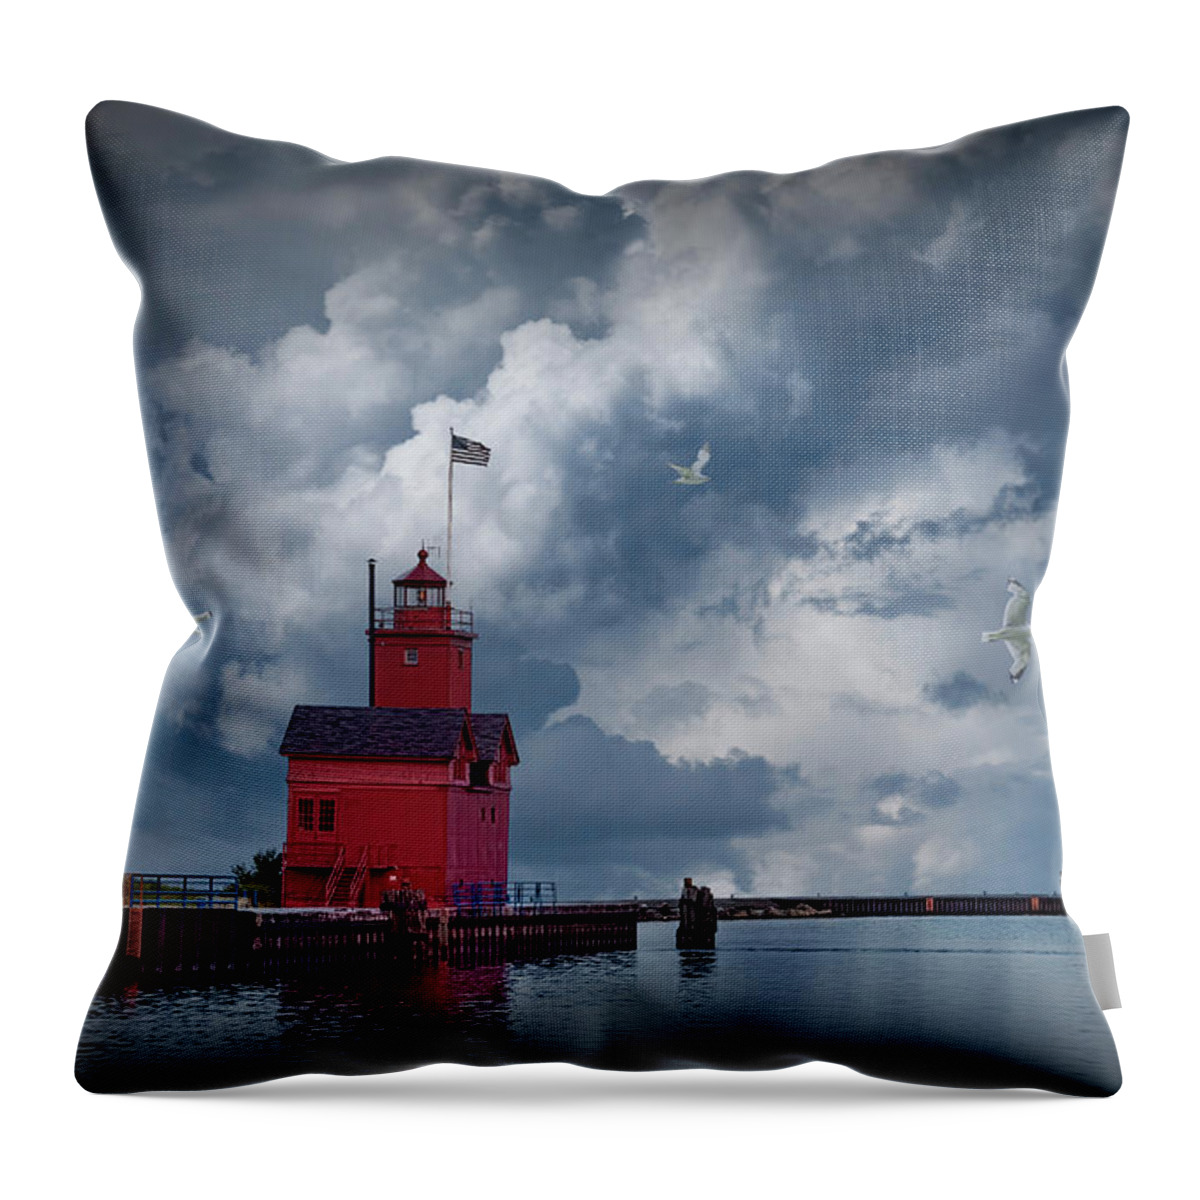 Art Throw Pillow featuring the photograph Big Red Lighthouse with Large Cloudy Sky and Flying Gulls at Ott by Randall Nyhof